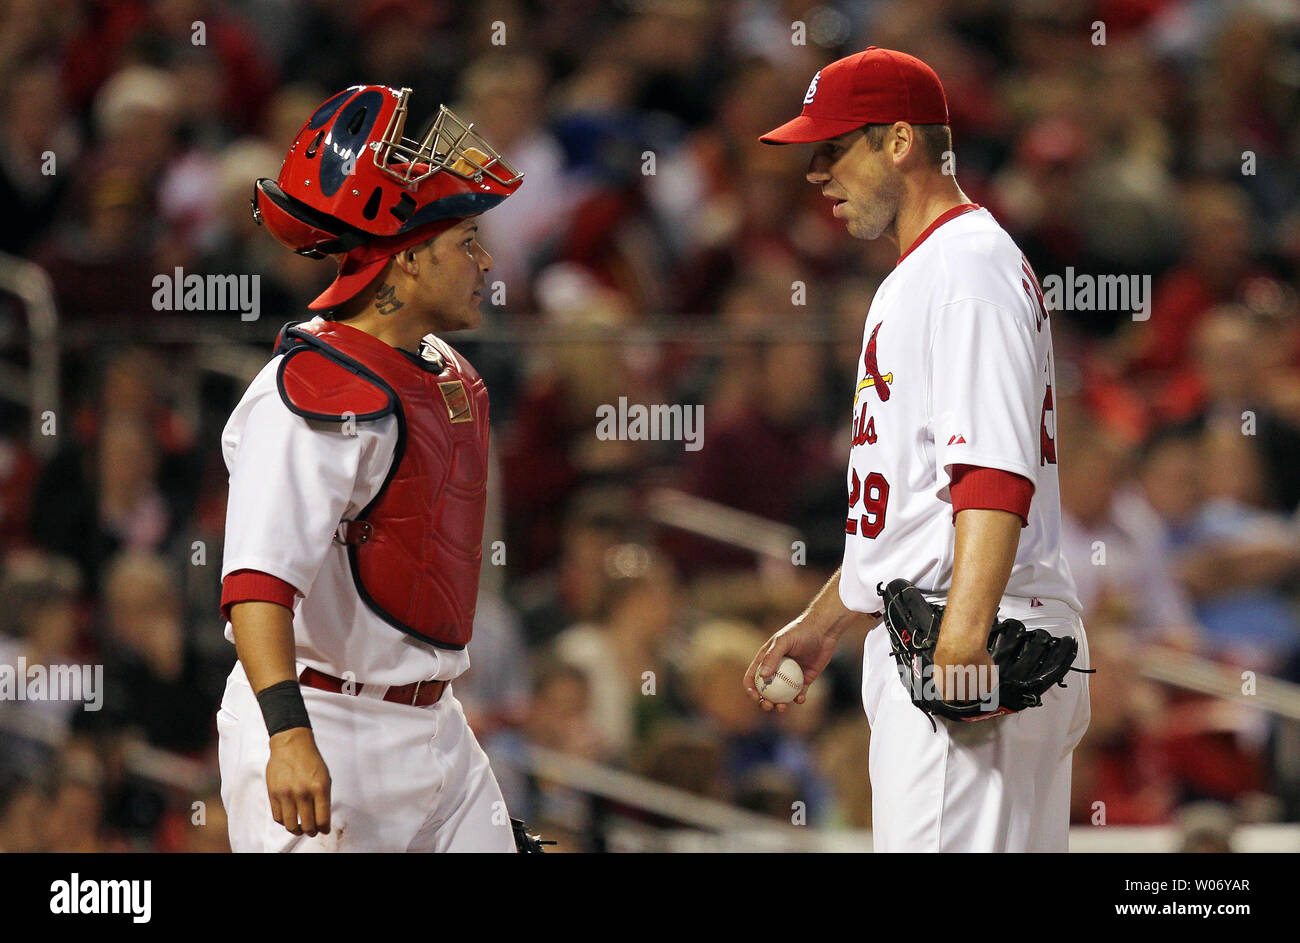 St. Louis Cardinals pitcher Chris Carpenter (R) talks to catcher Yadier  Molina after Carpenter committed a throwing error in the the fourth inning  against the Florida Marlins at Busch Stadium in St.